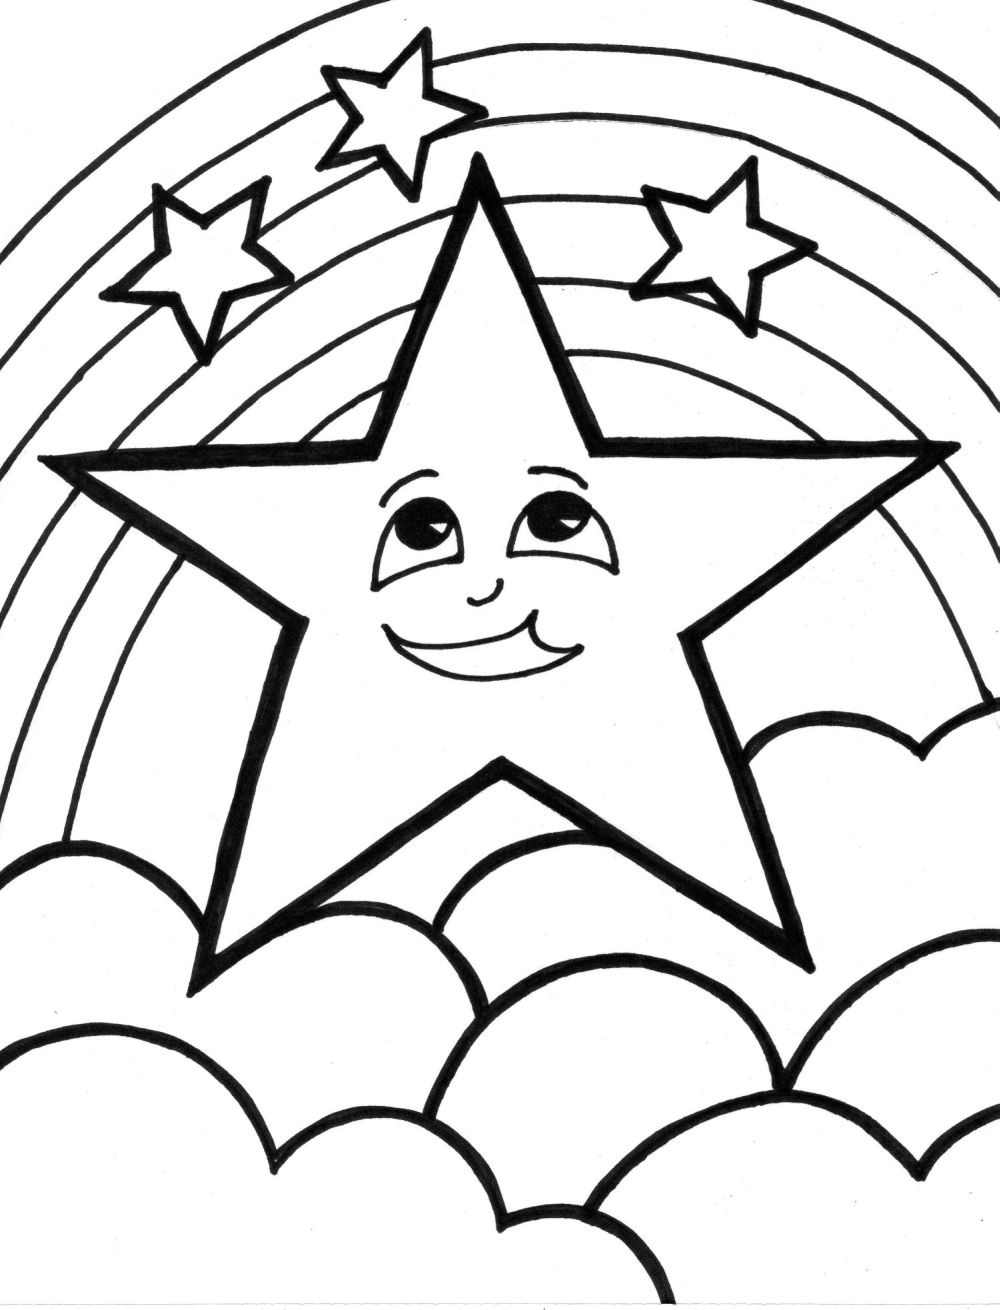 kanes old coloring pages - photo #49